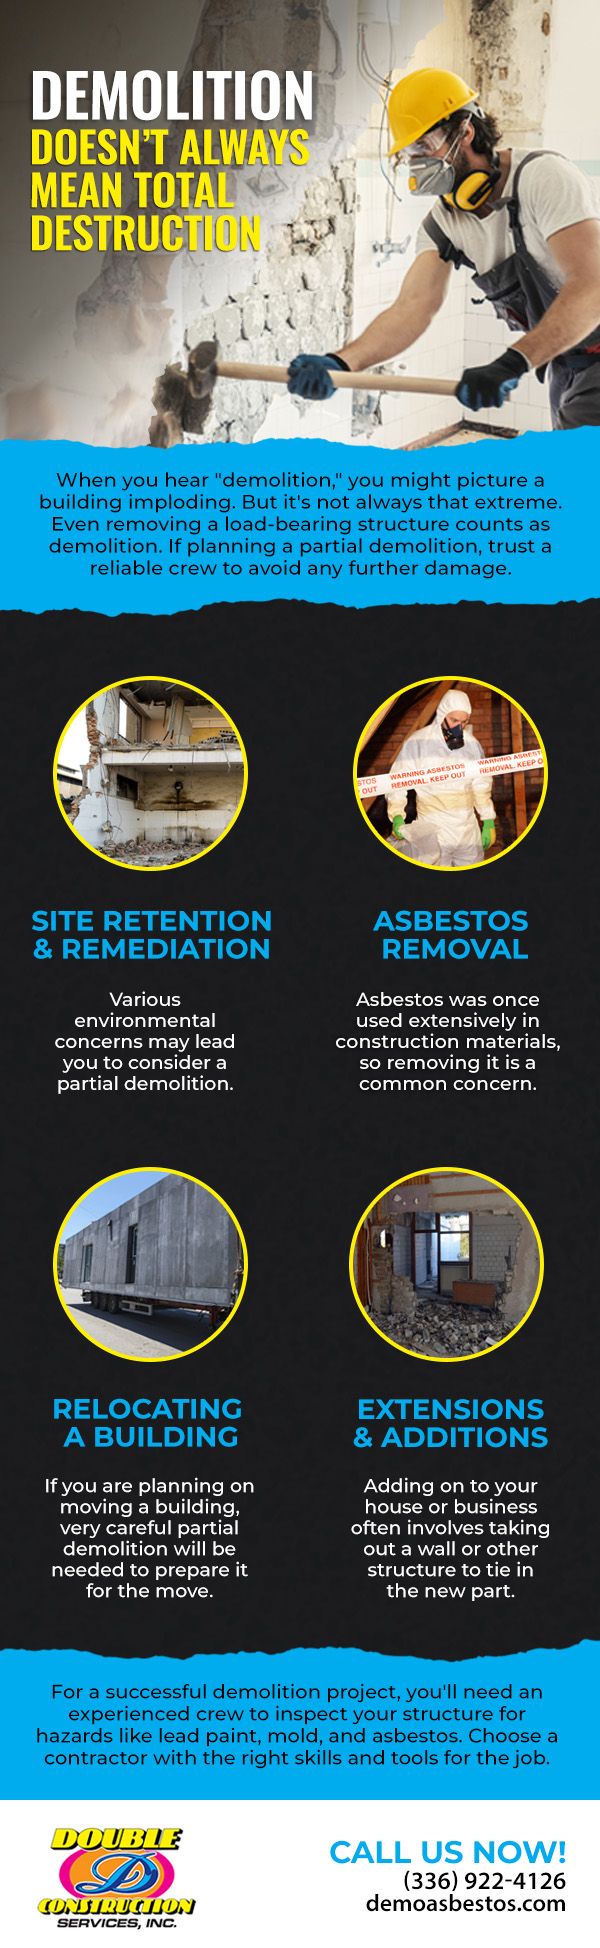 Demolition Can Take Different Forms Depending on Your Needs